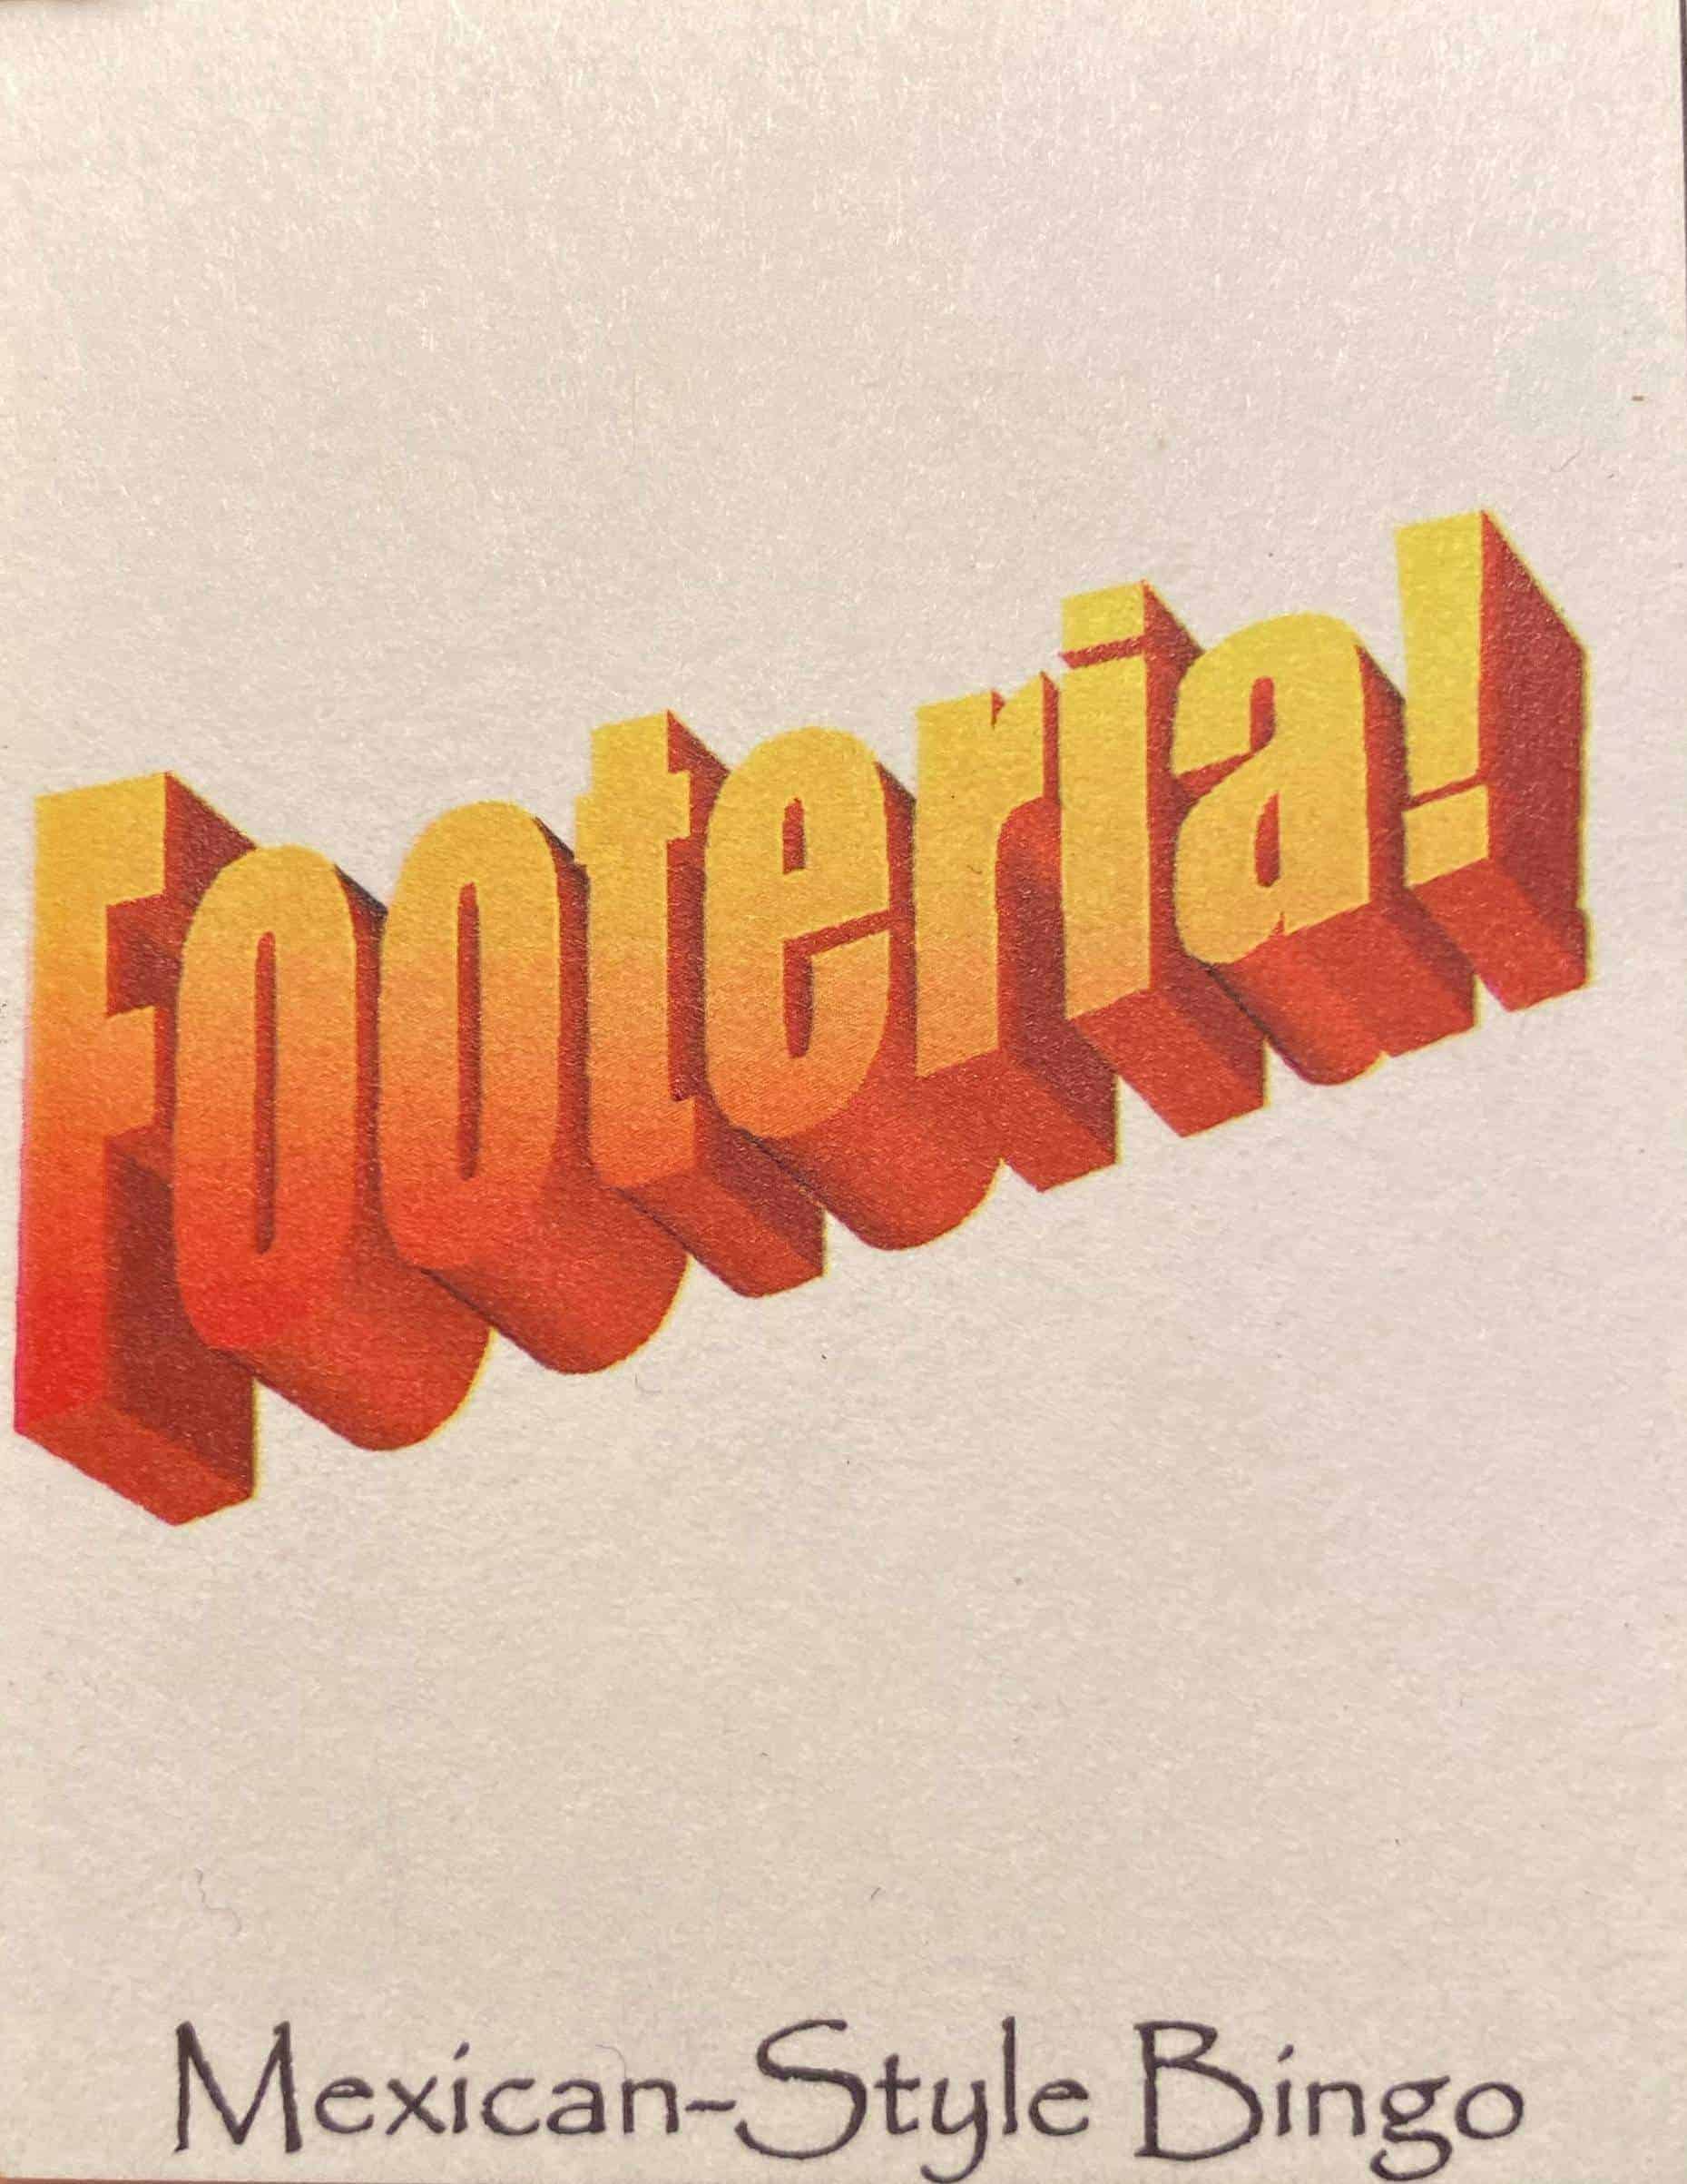 This Footeria (Spanish/English Loteria-Style Game) Foo Dog Blog is made with love by Victoria J. Hyla (Author)/Victorious Editing Services! Shop more unique gift ideas today with Spots Initiatives, the best way to support creators.